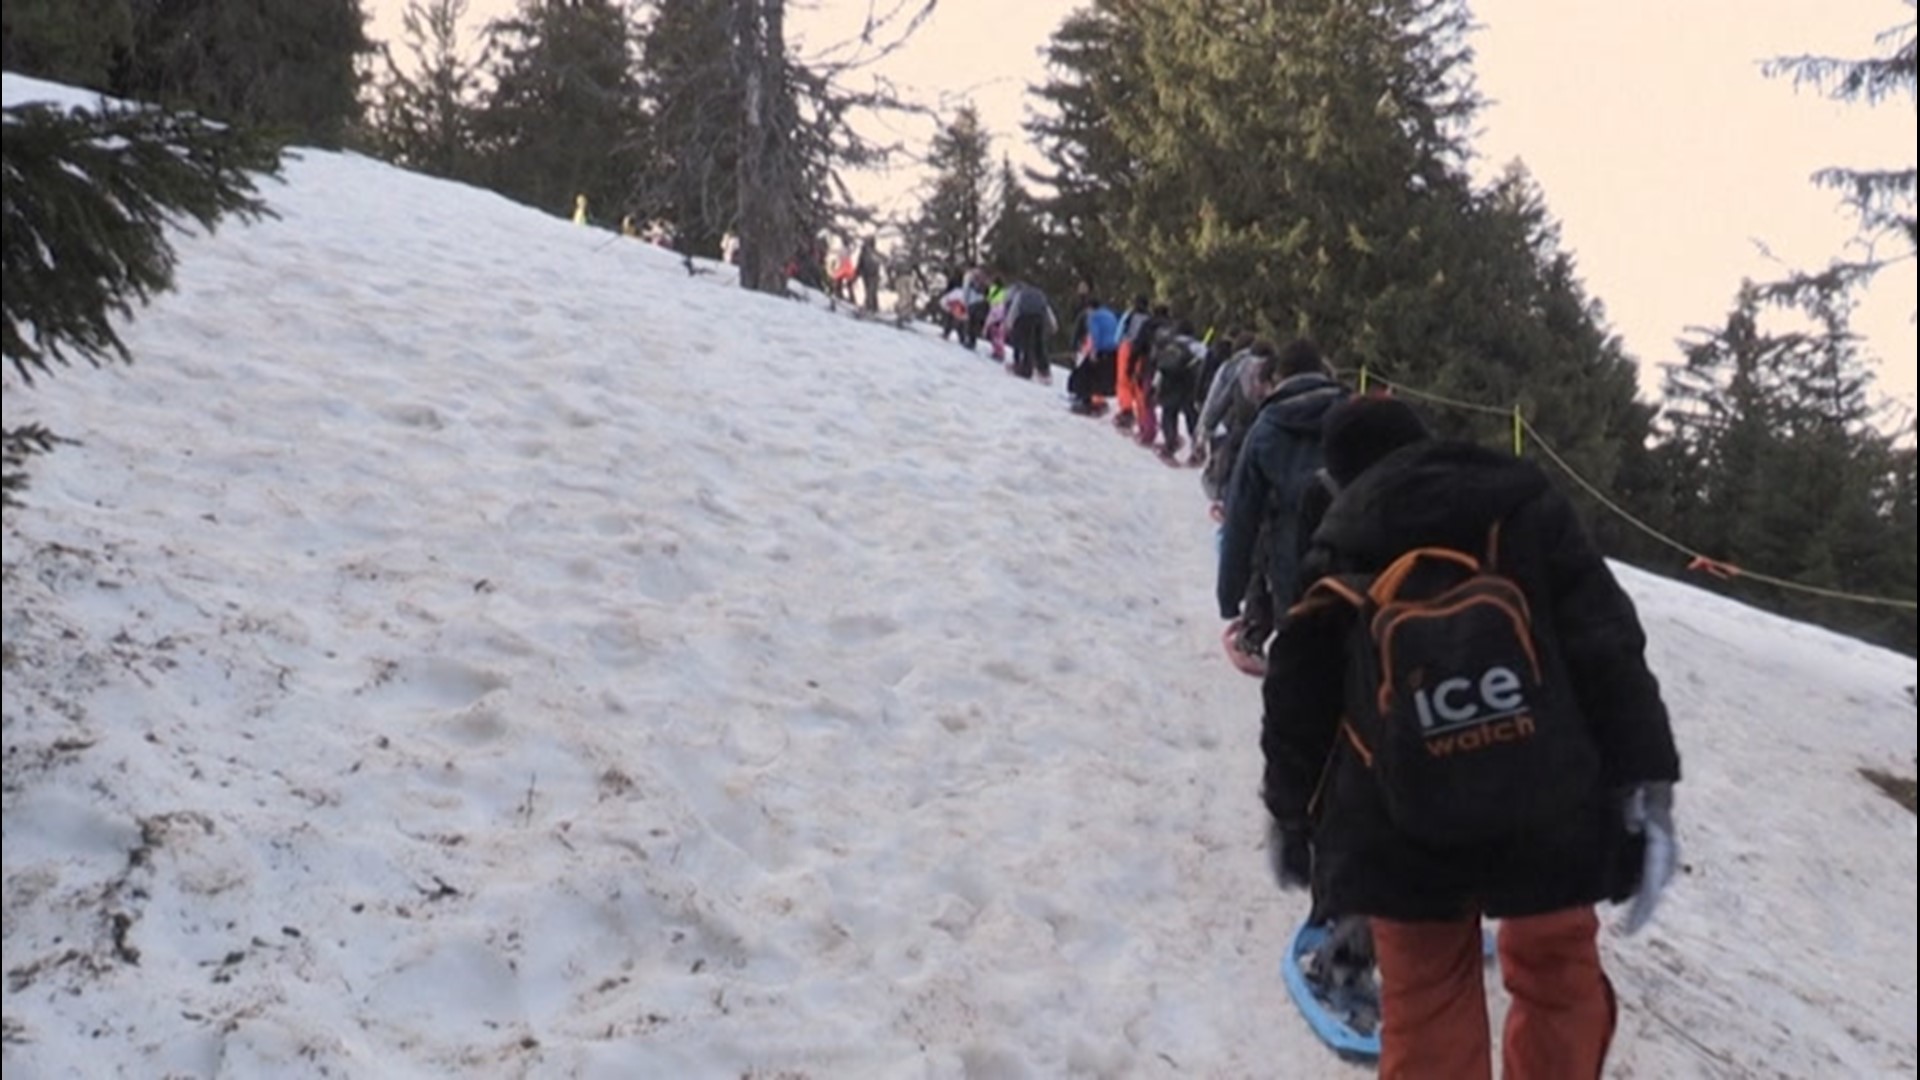 With gyms closed due to COVID-19, a school in le Semnoz is taking advantage of the nearby mountains by having children go snowshoeing in the forest instead.